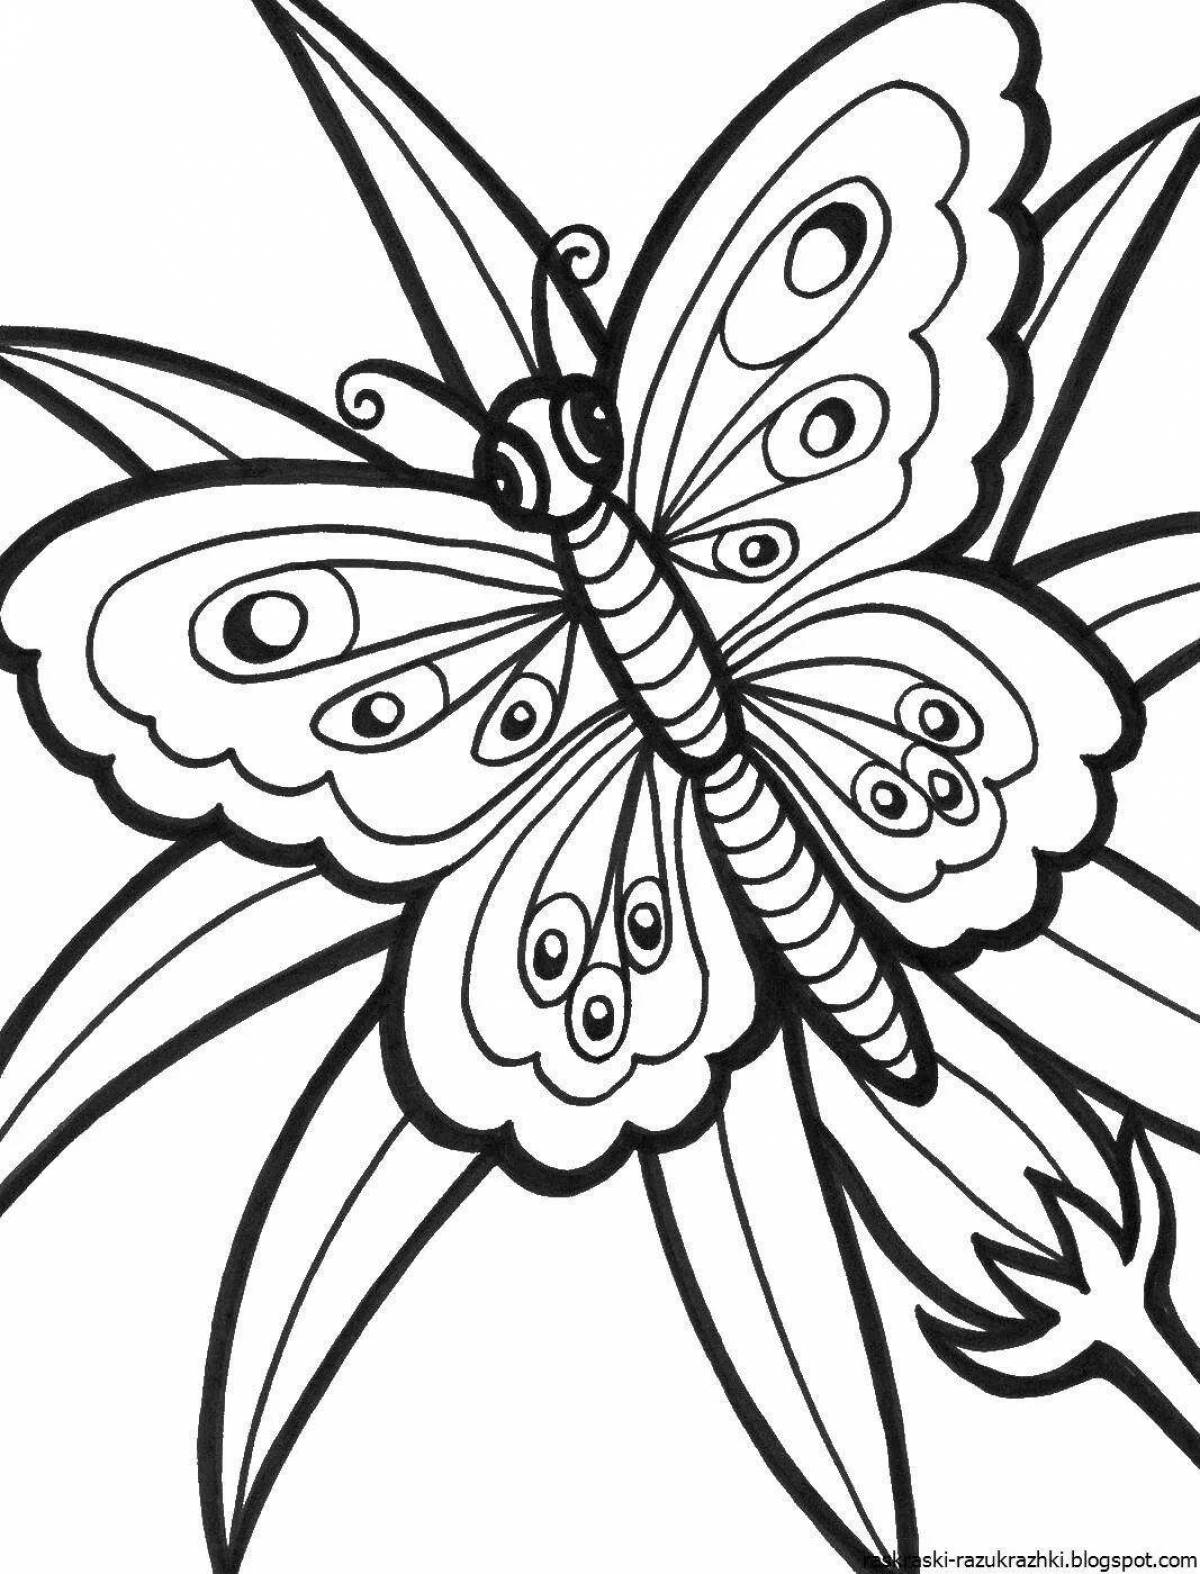 Playful coloring of flowers and butterflies